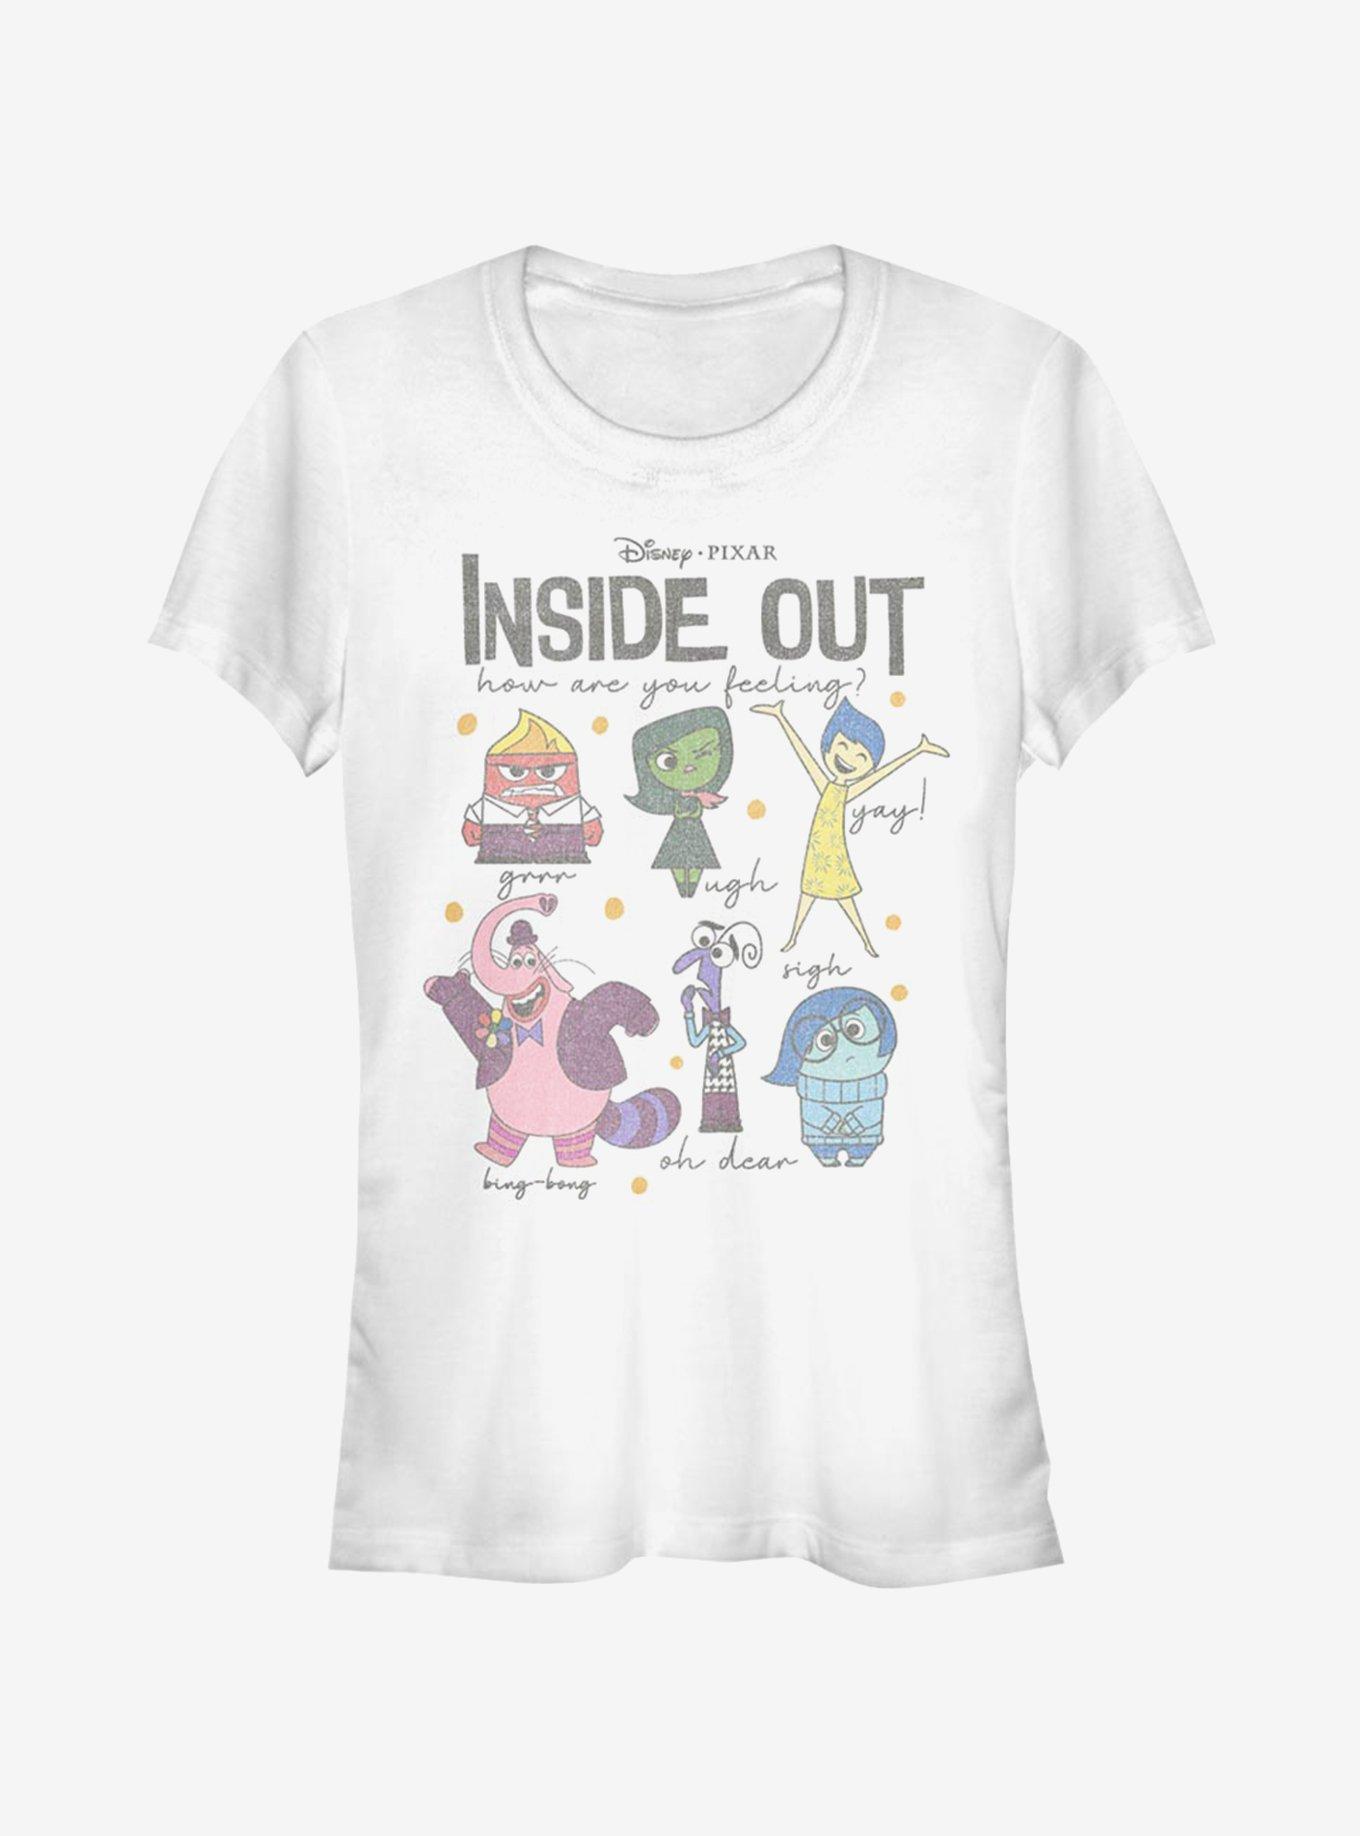 Inside-Out T-Shirt - Ready-to-Wear 1A5W6F